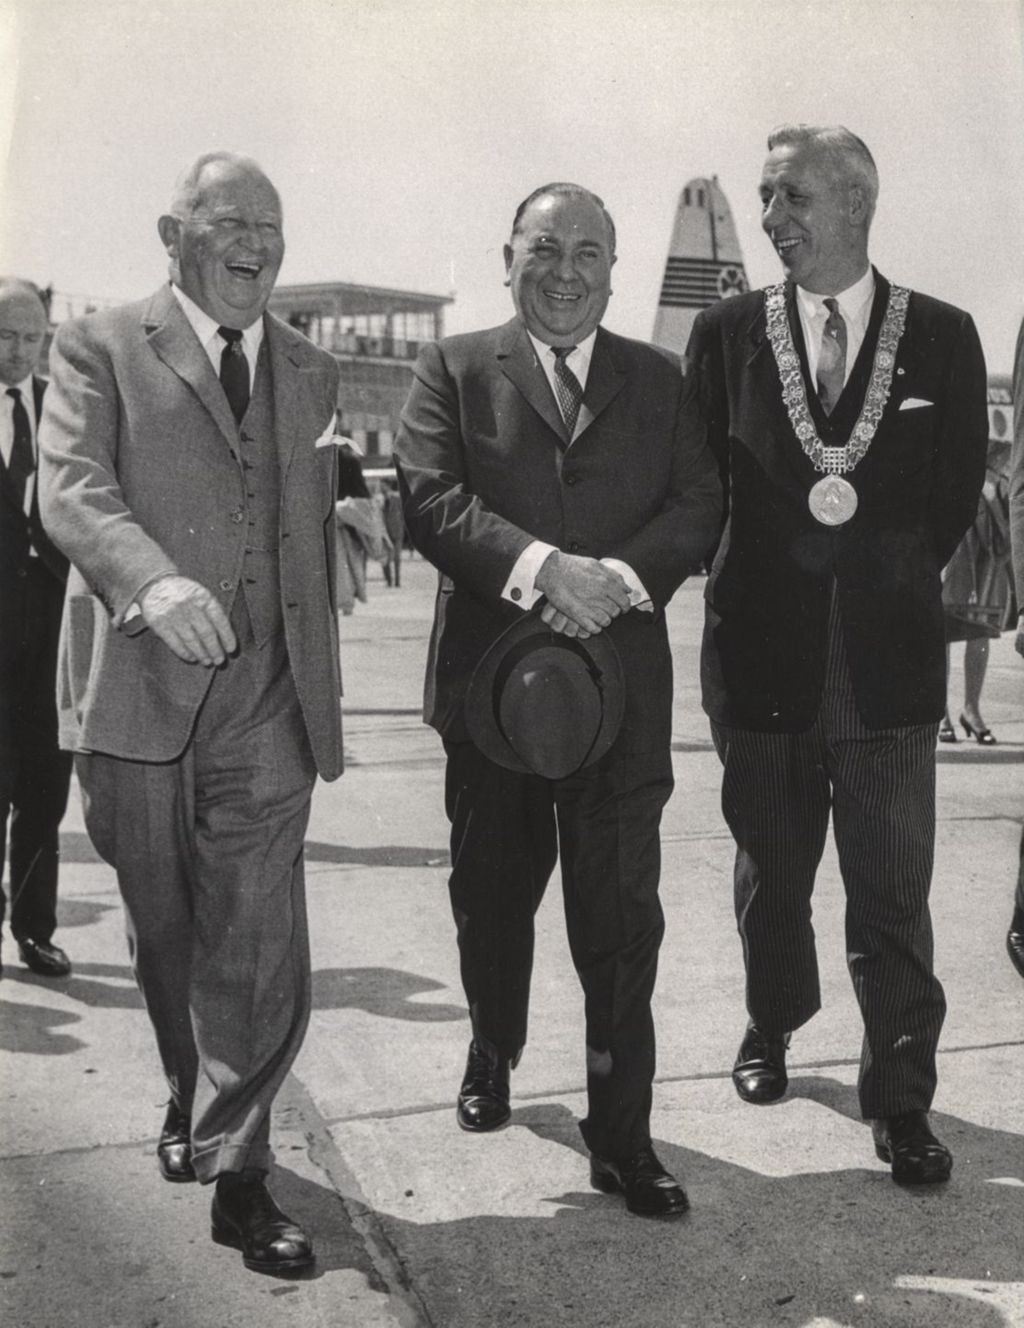 Trip to Ireland, Richard J. Daley, with the Lord Mayor of Dublin at the Dublin airport